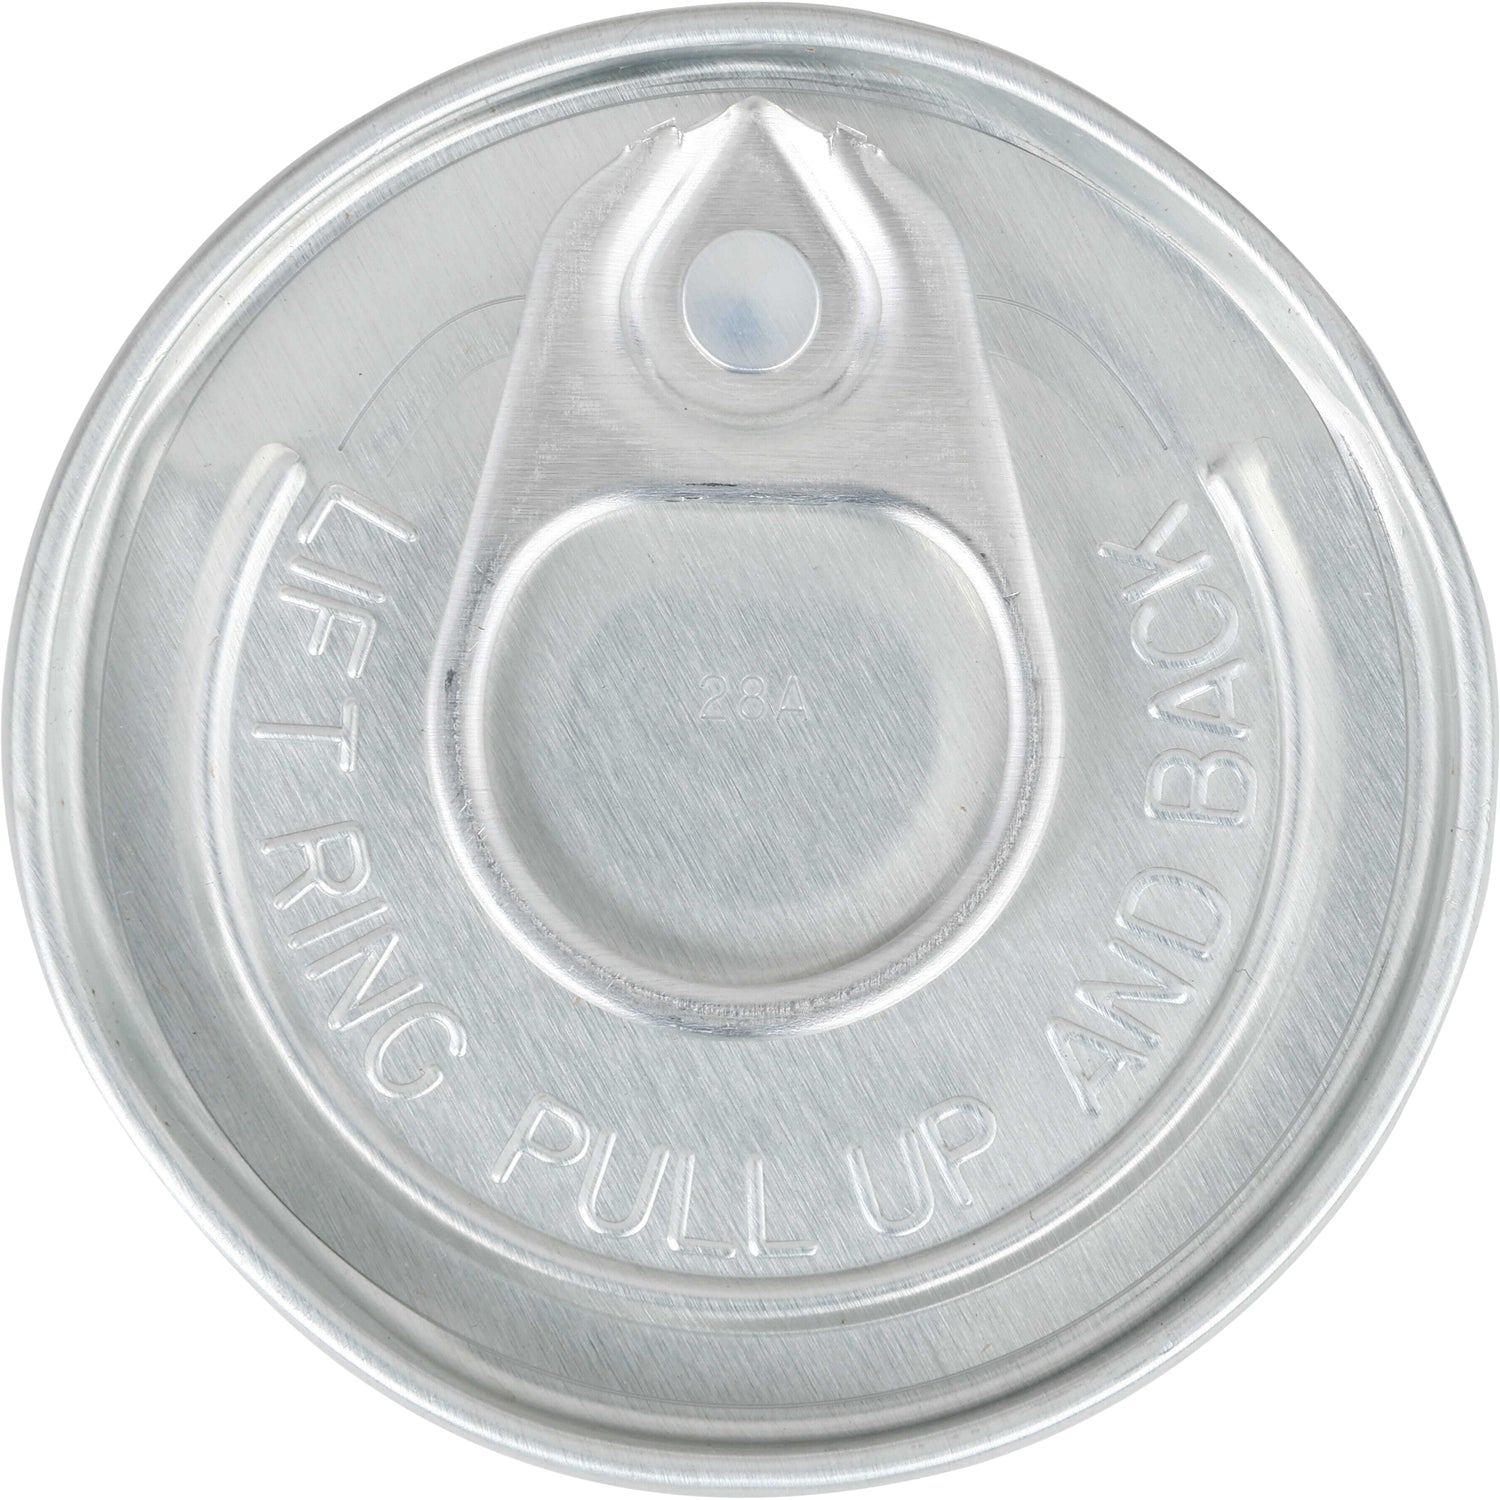 Metal pull tab on white background with pressed words that read "Lift Ring Pull Up and Back"